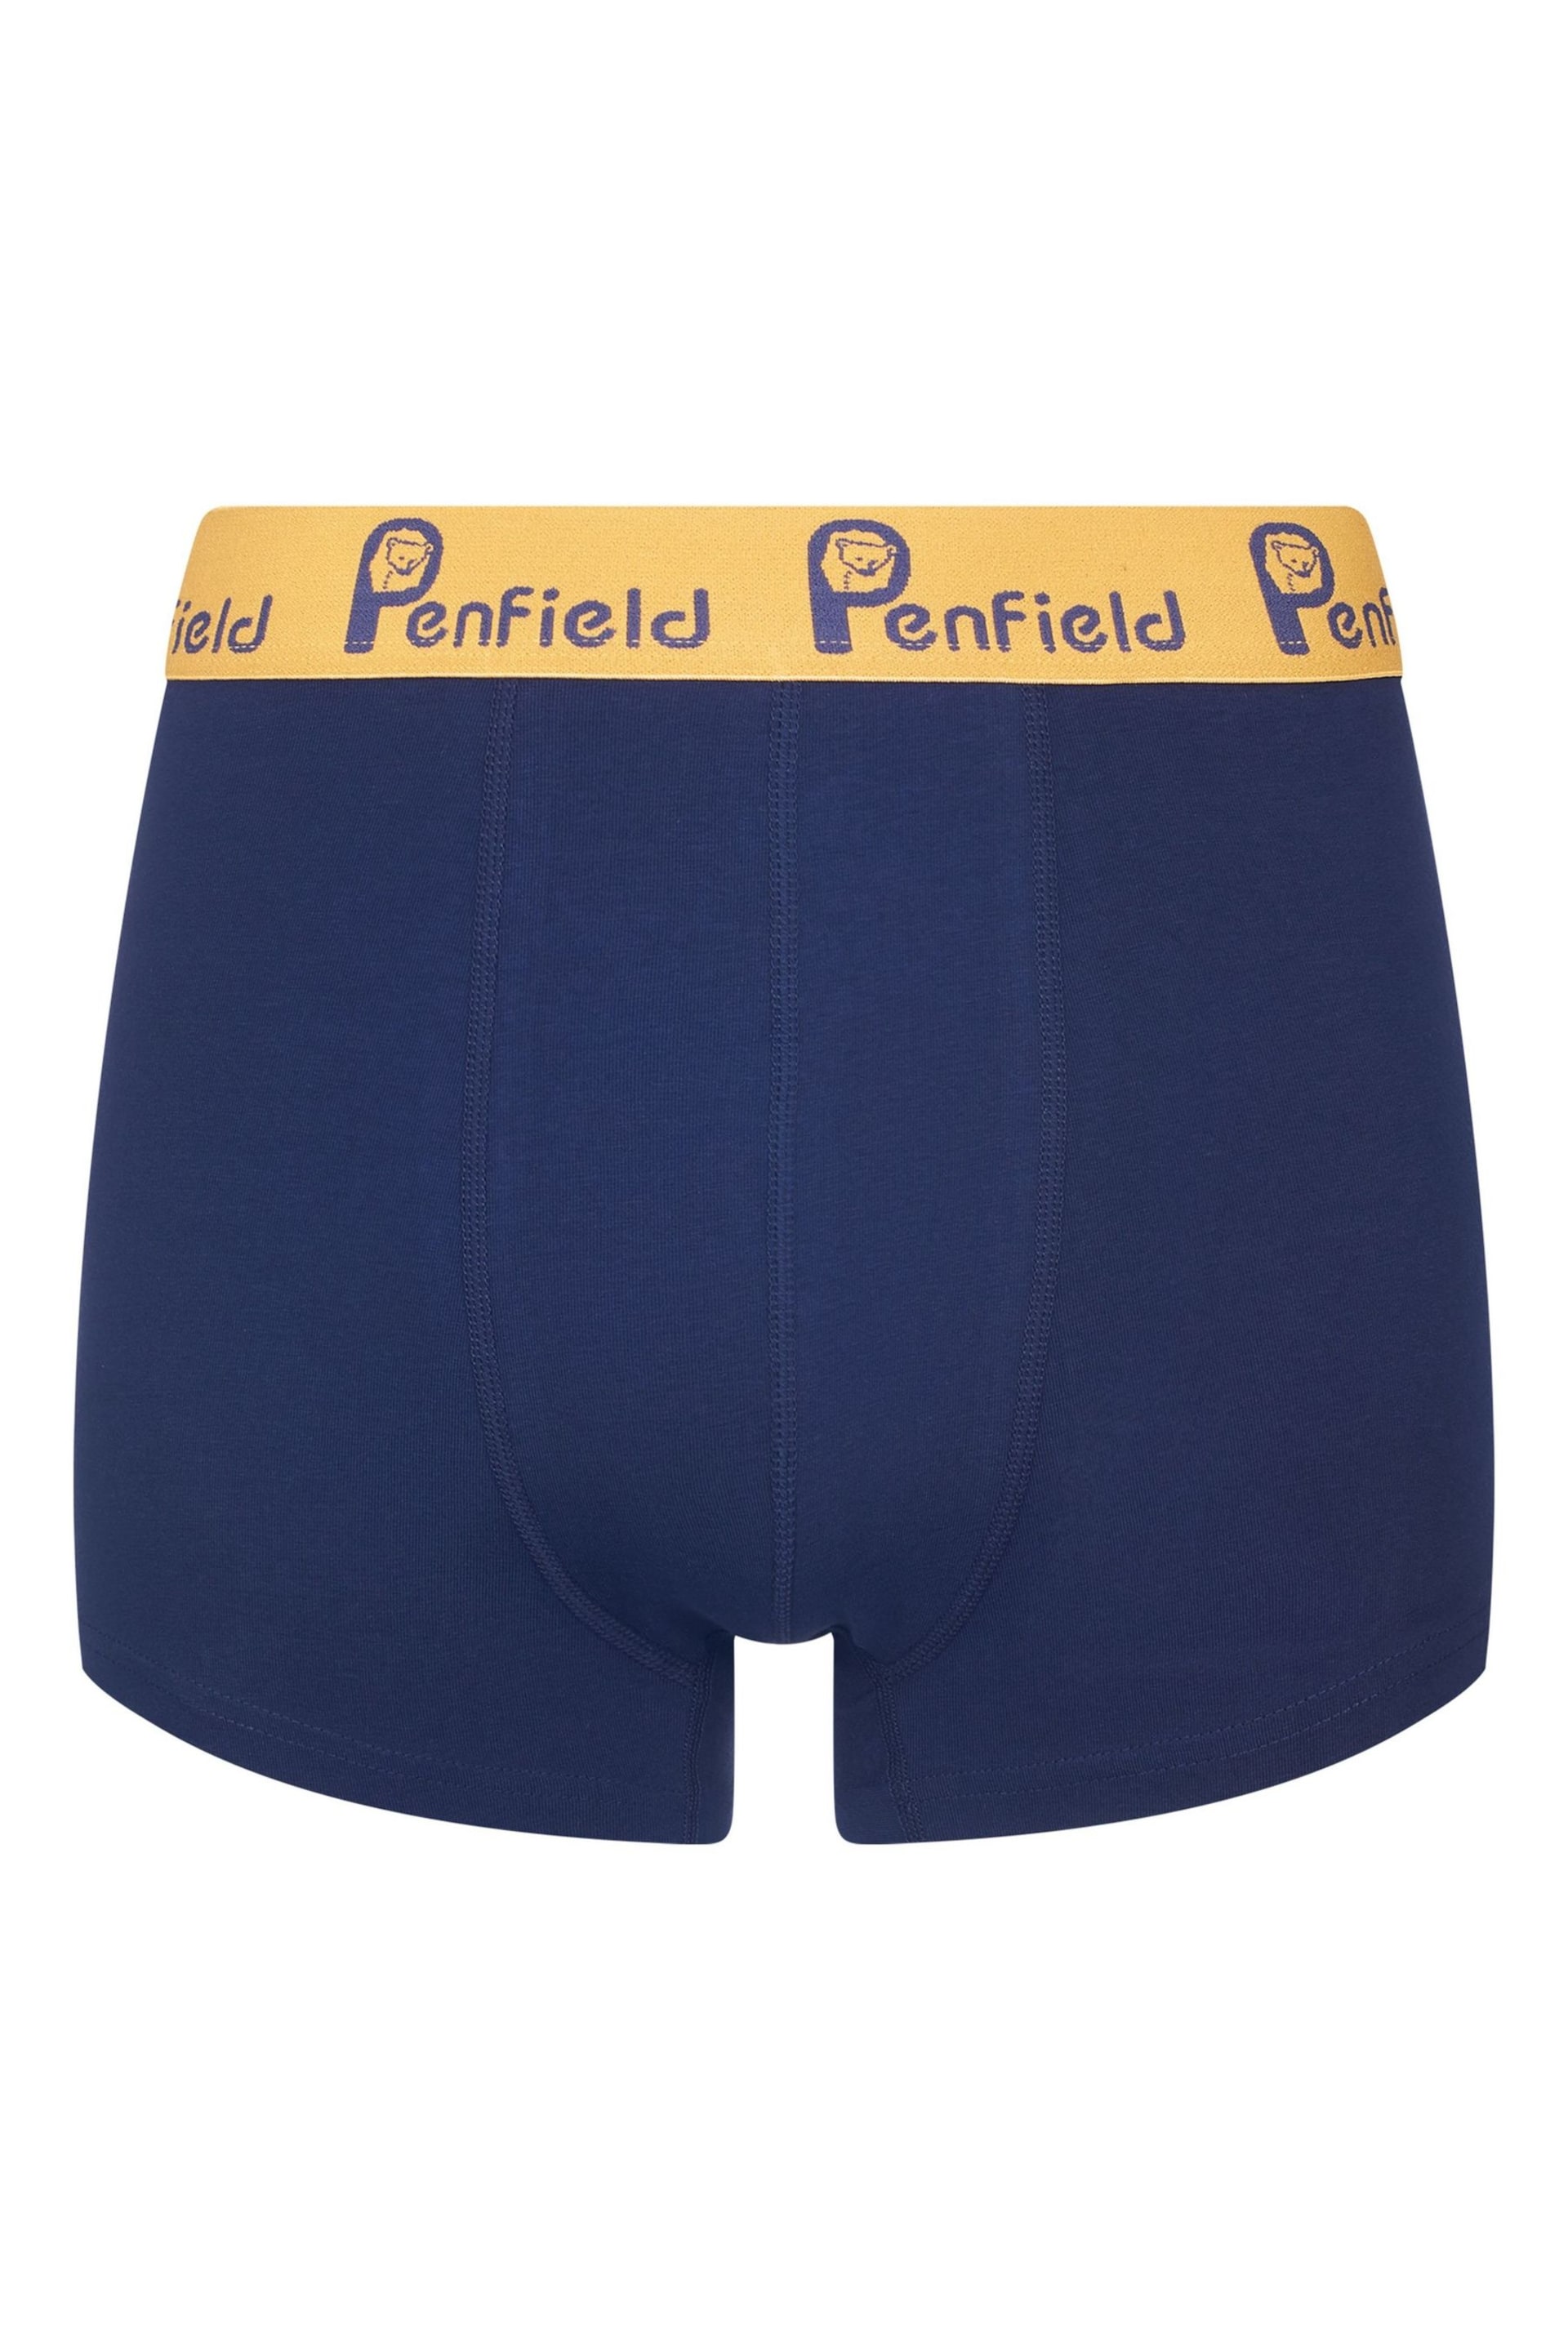 Penfield Blue Penfield Script Boxers 3 Pack - Image 3 of 5